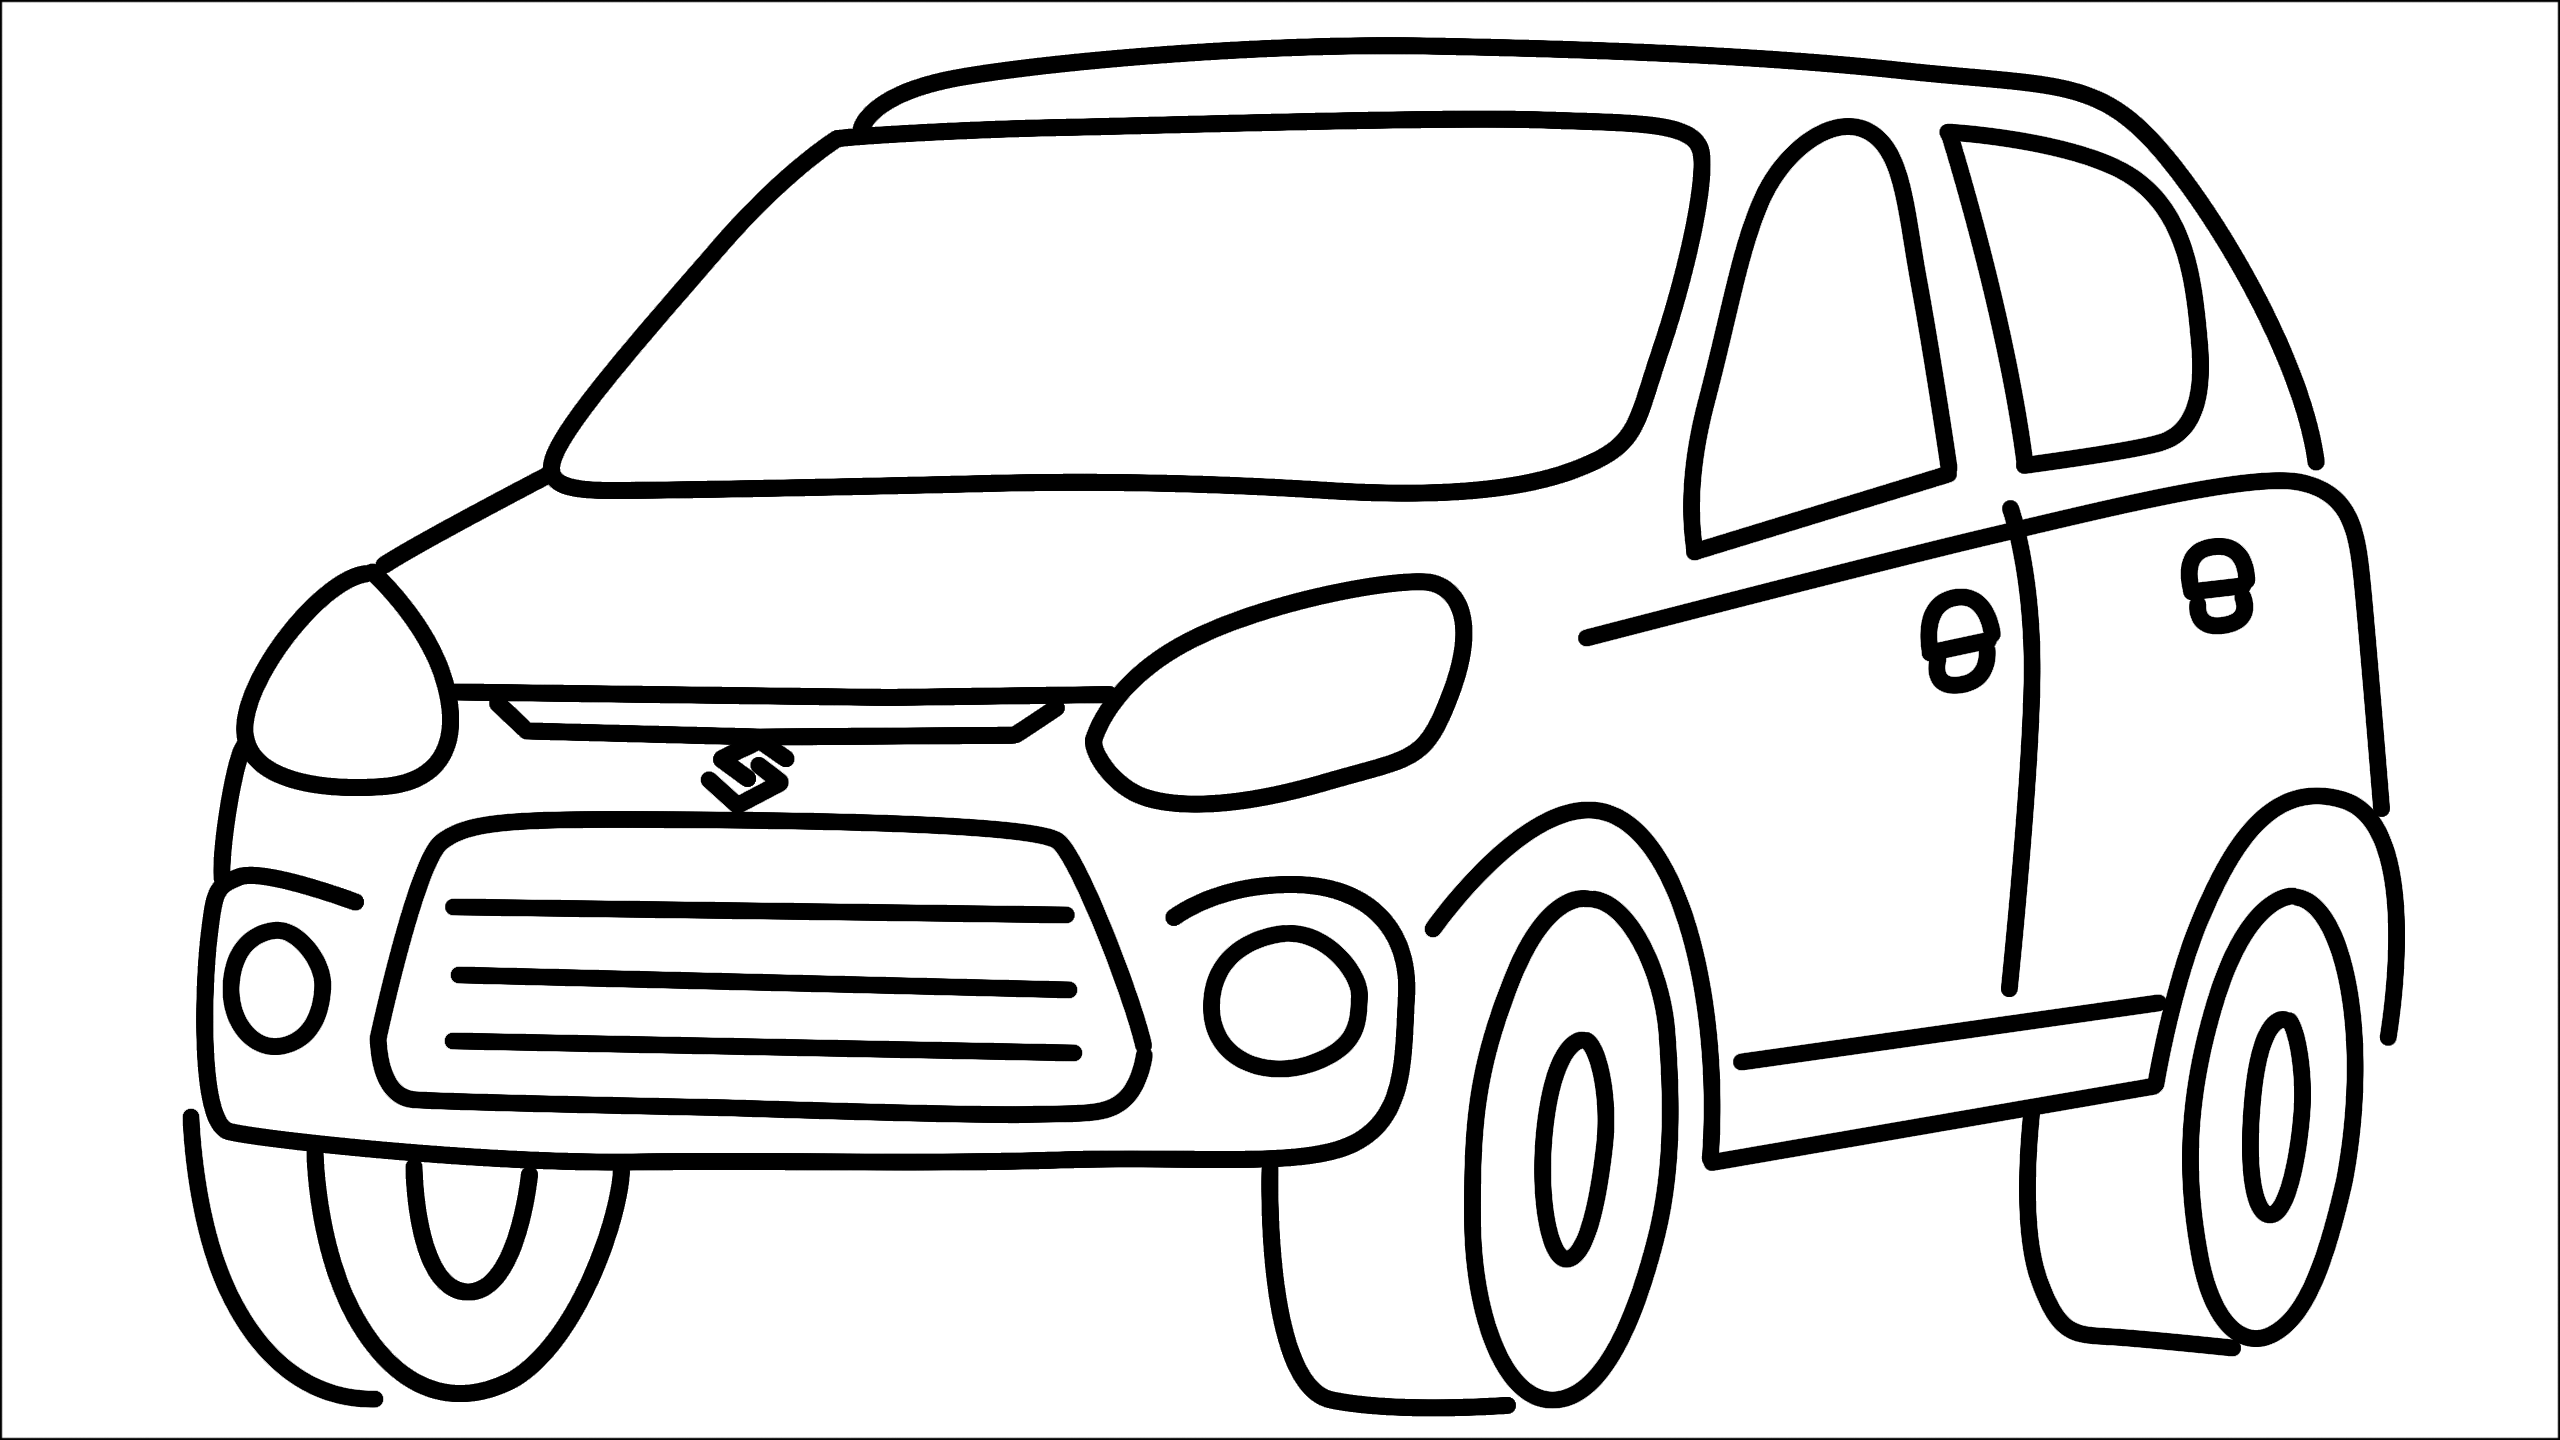 How to draw Alto 800 step by step for beginners